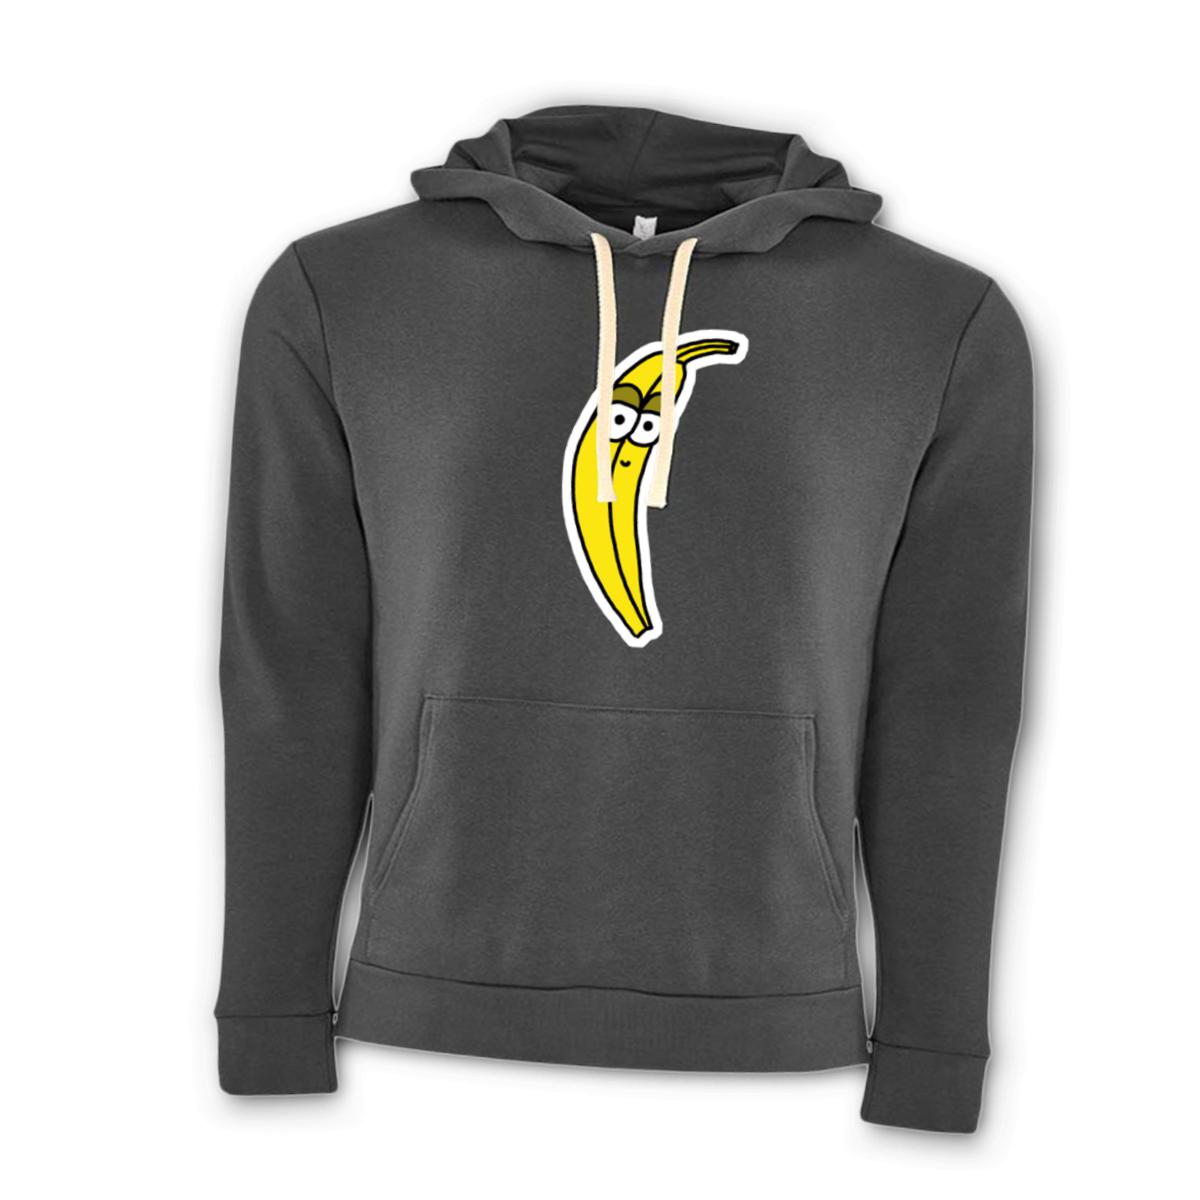 Plantain Unisex Pullover Hoodie Small heavy-metal